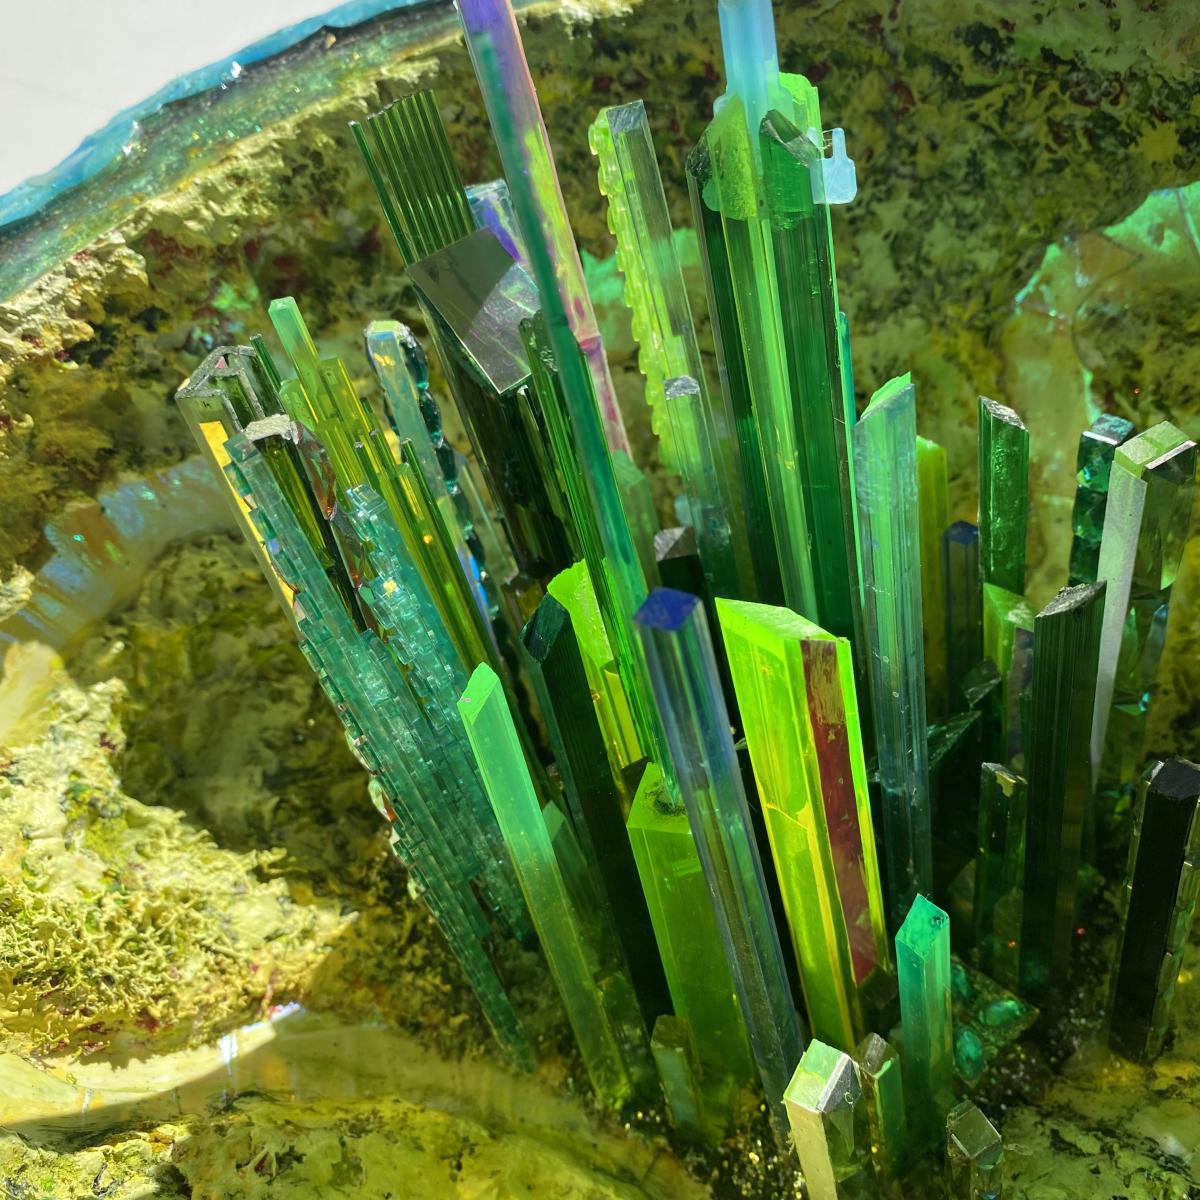 "The Emerald City Geode" | Partial interior view